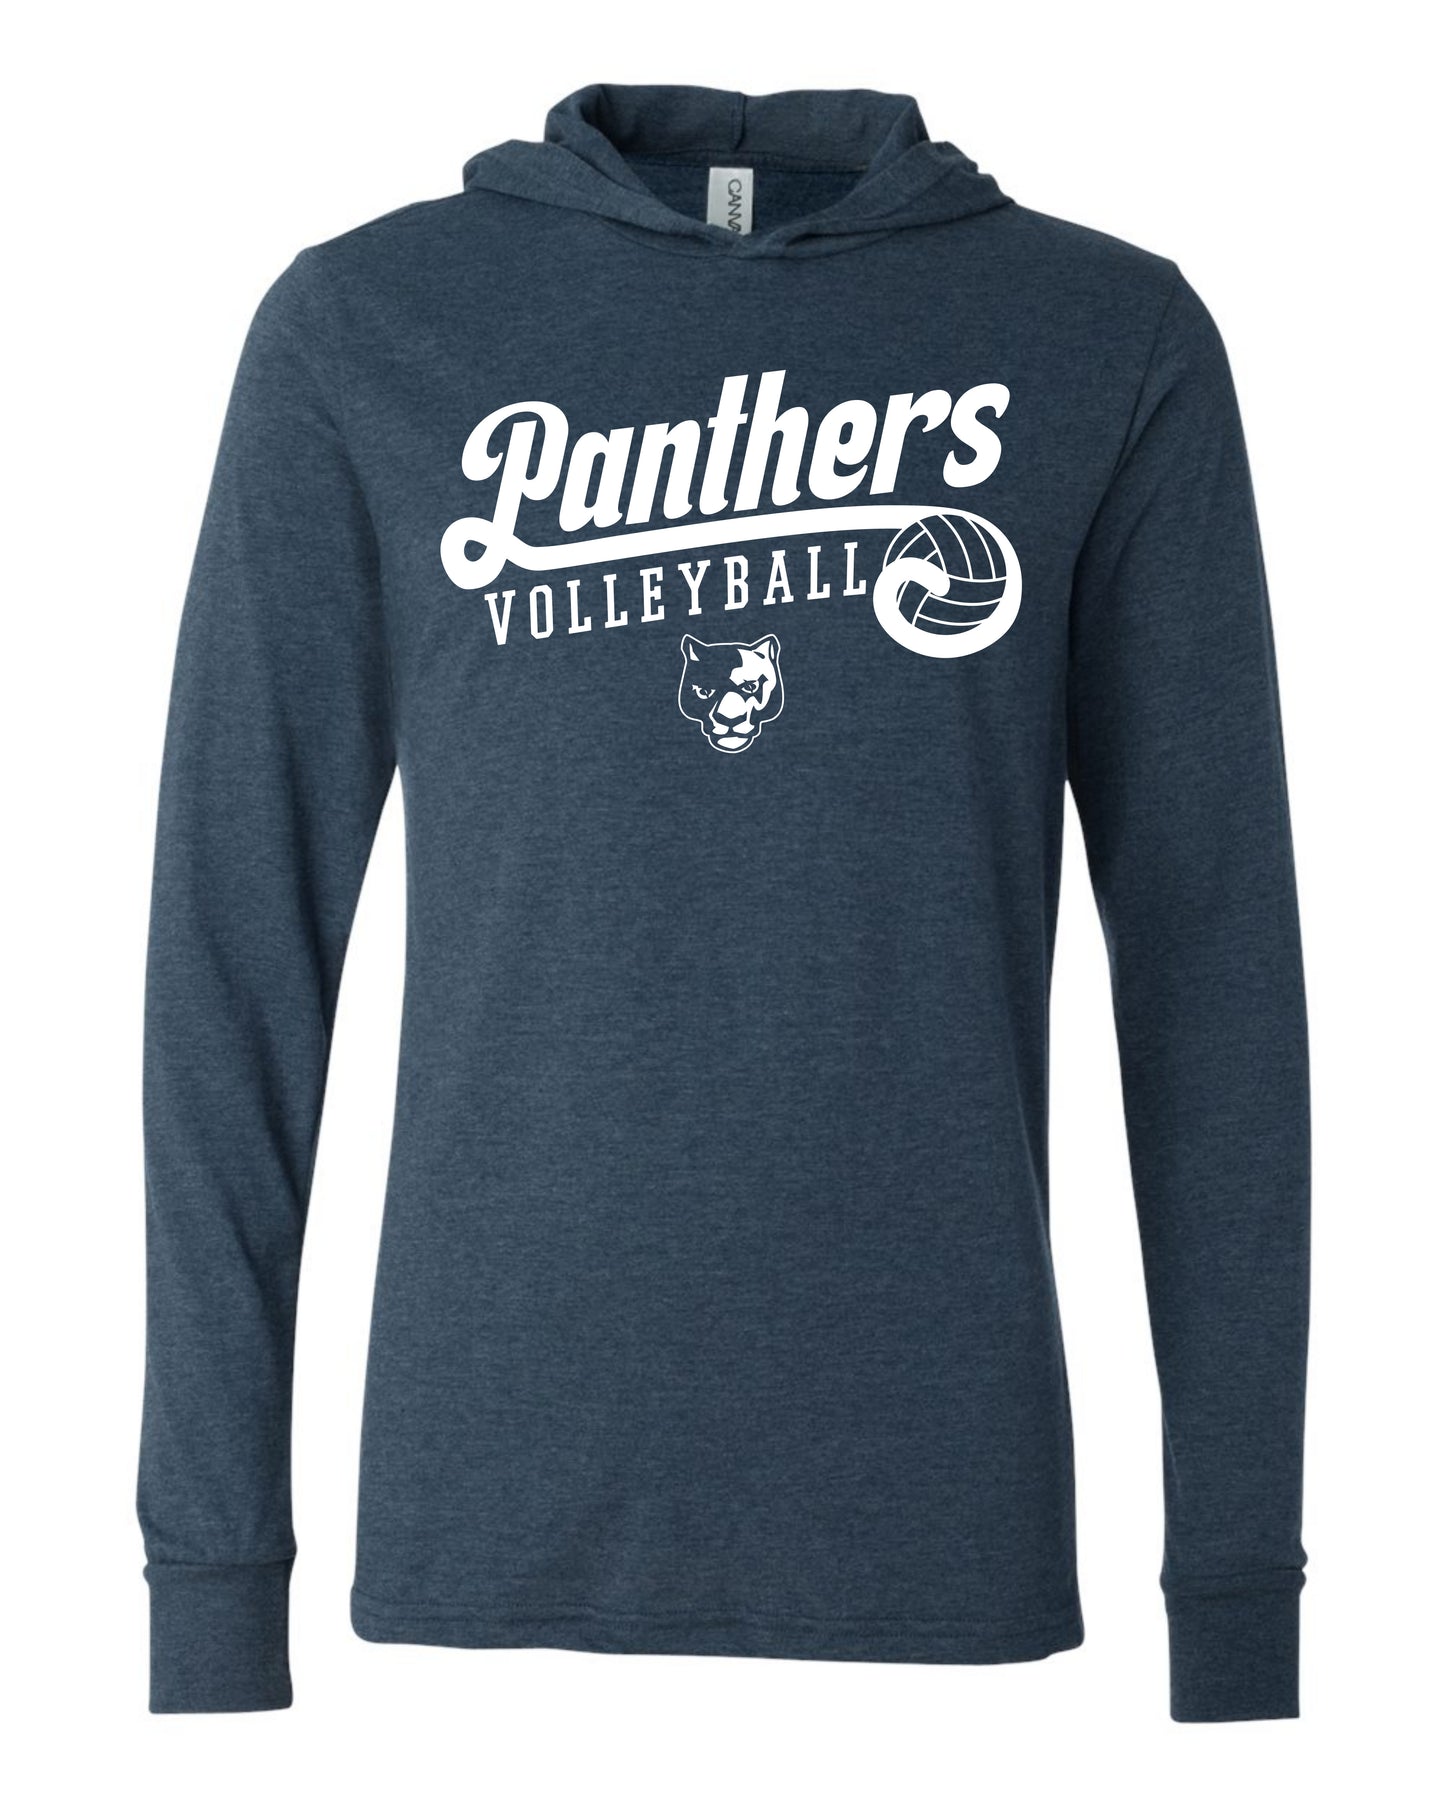 Panthers Volleyball Retro - Adult Hooded Long Sleeve